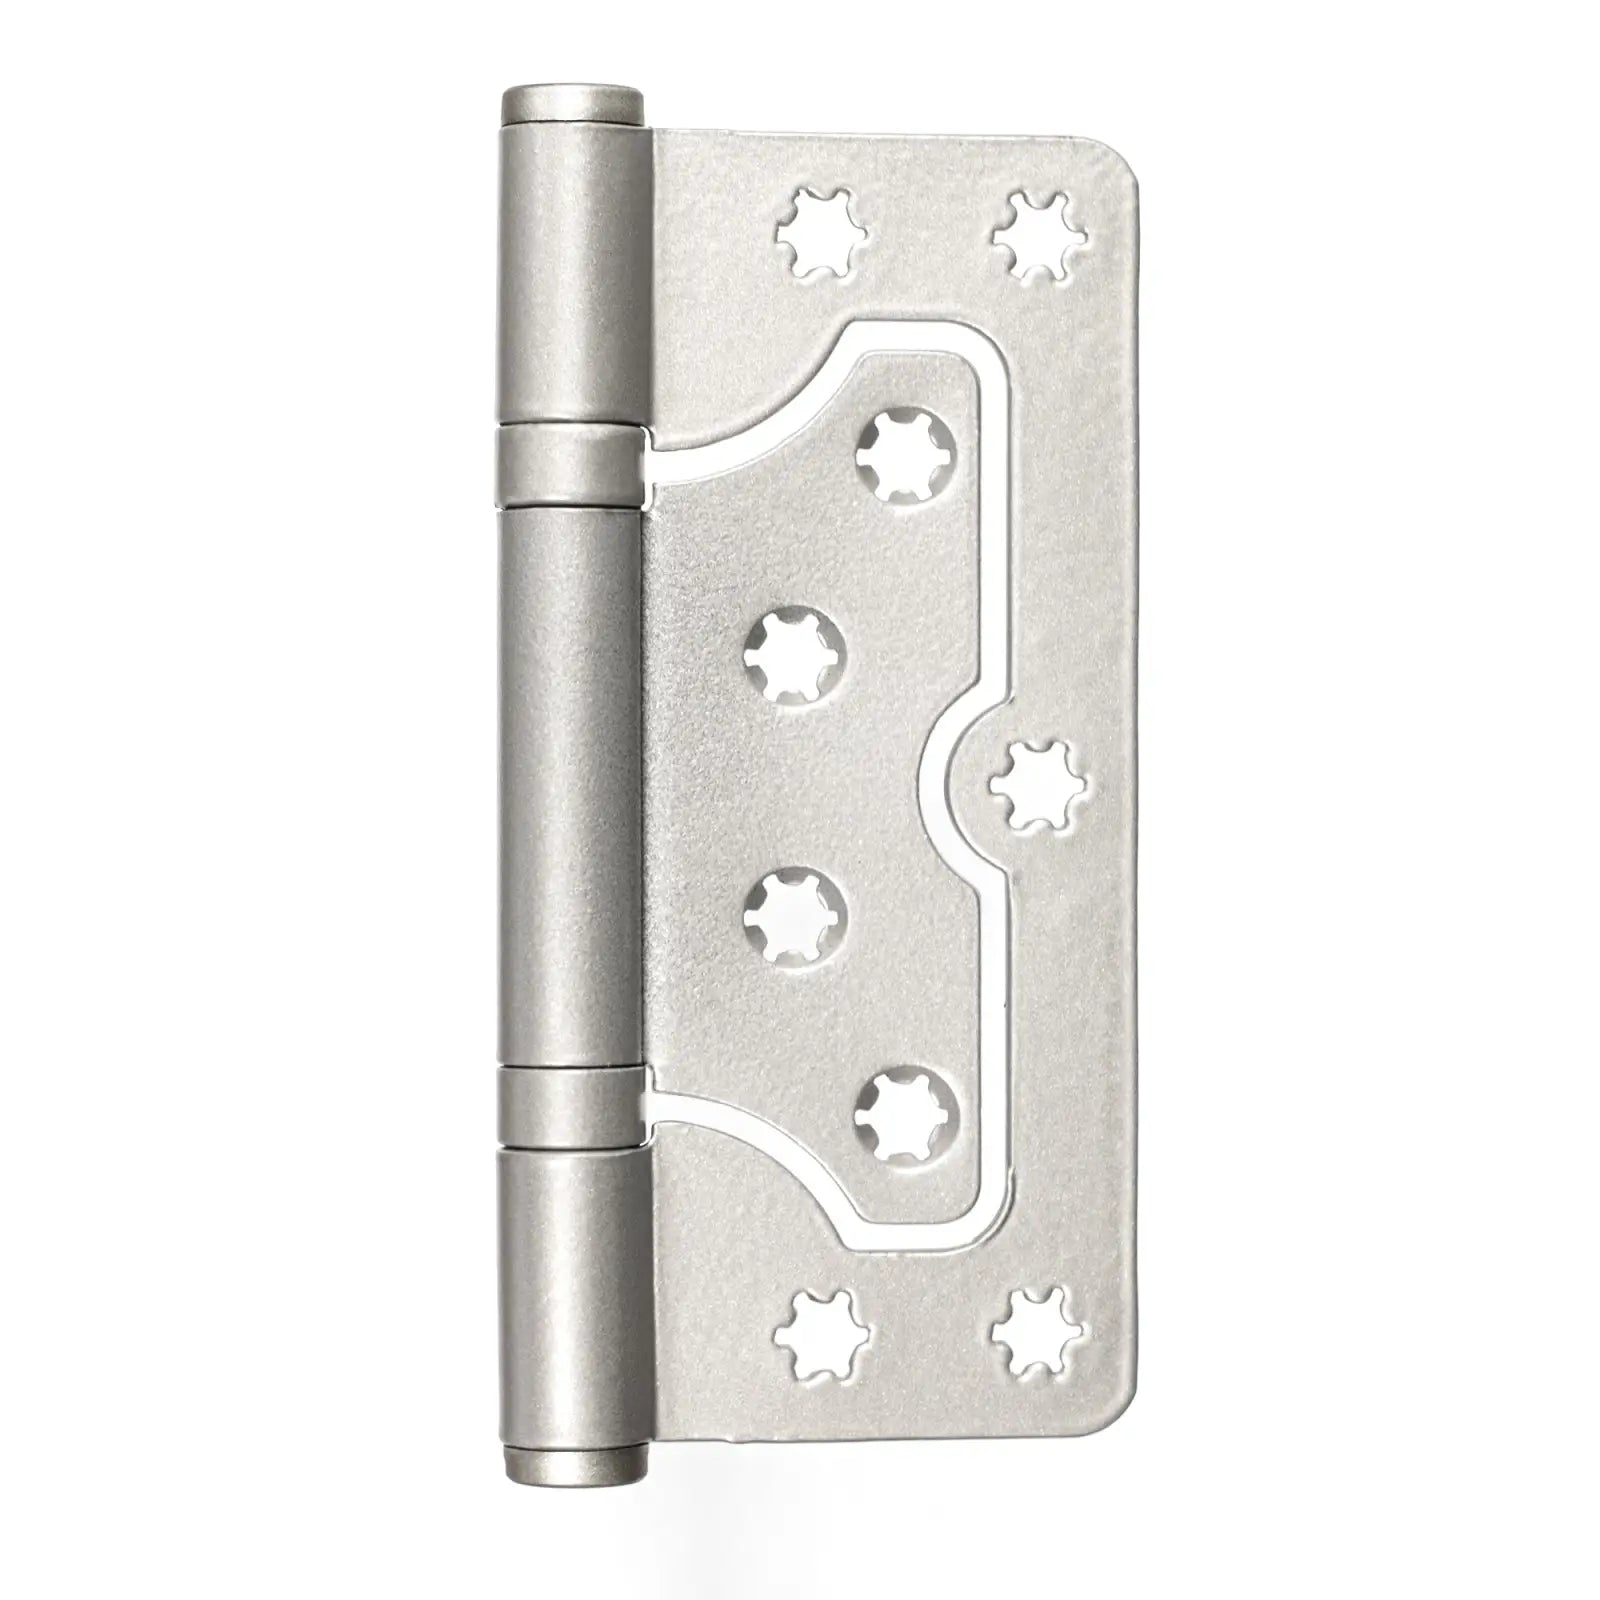 Stainless Steel Flush Door Hinges 100mm - Decor And Decor #colour_satin nickel